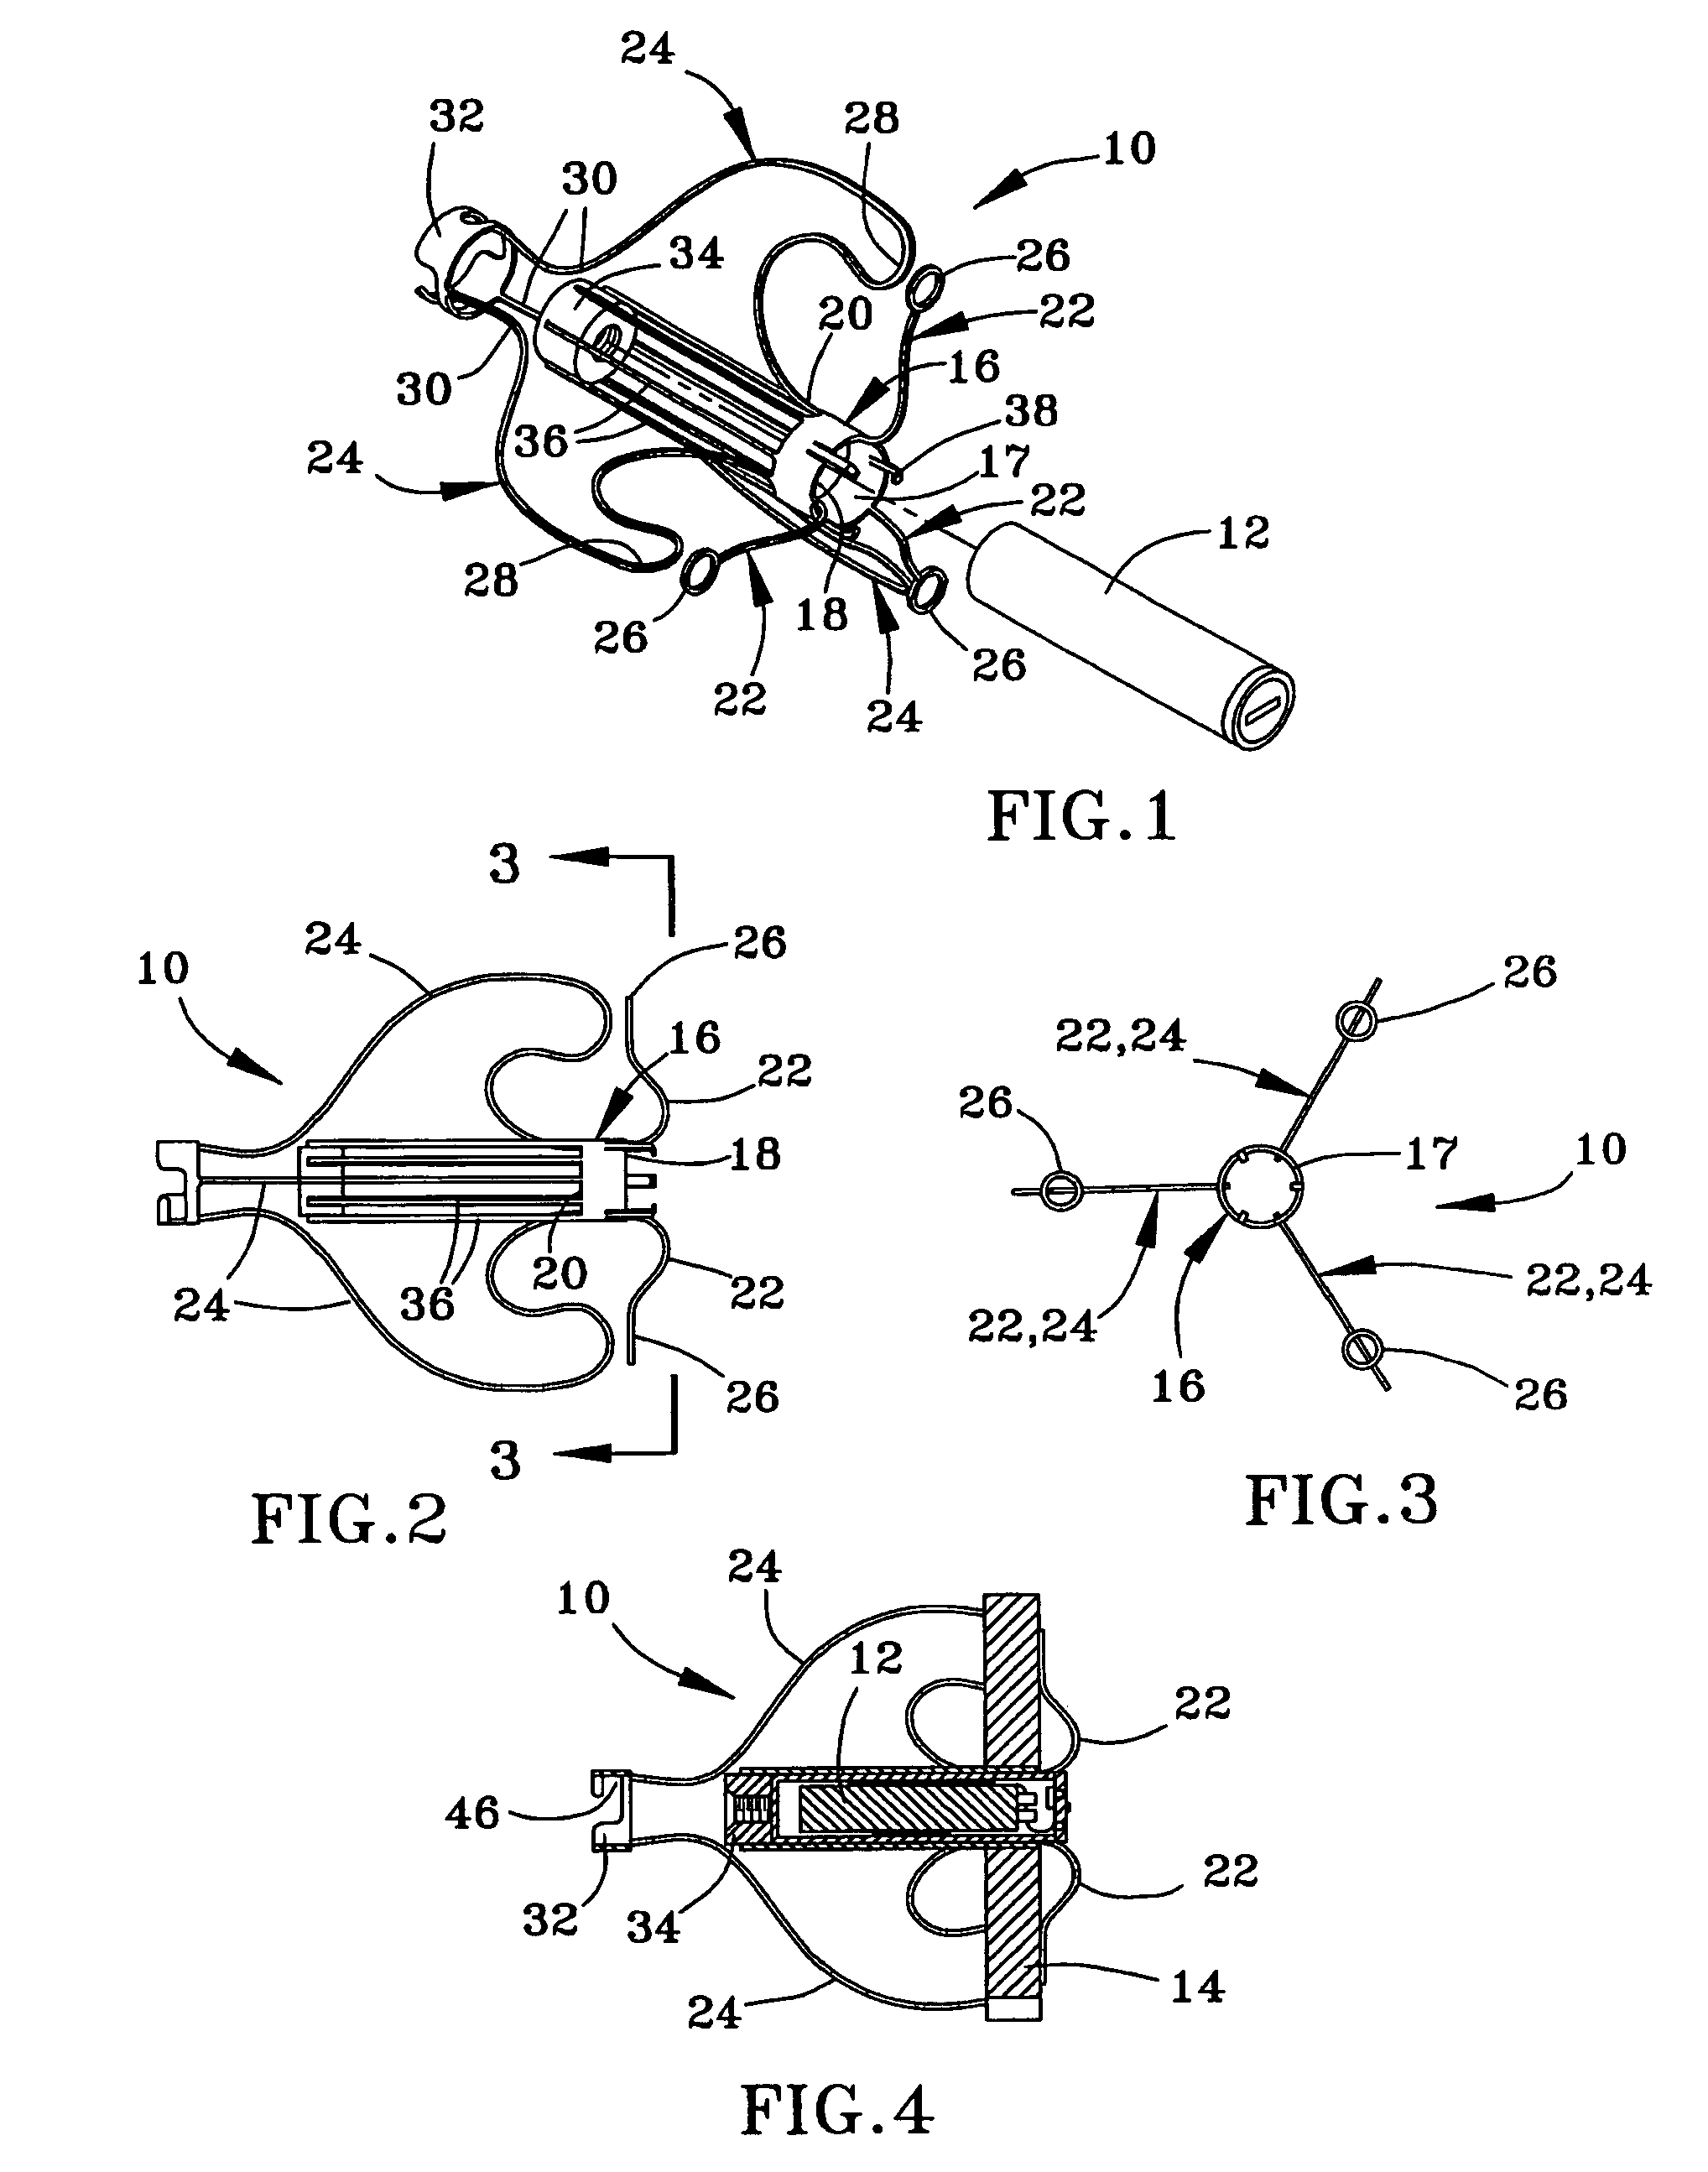 Anchor for medical implant placement and method of manufacture